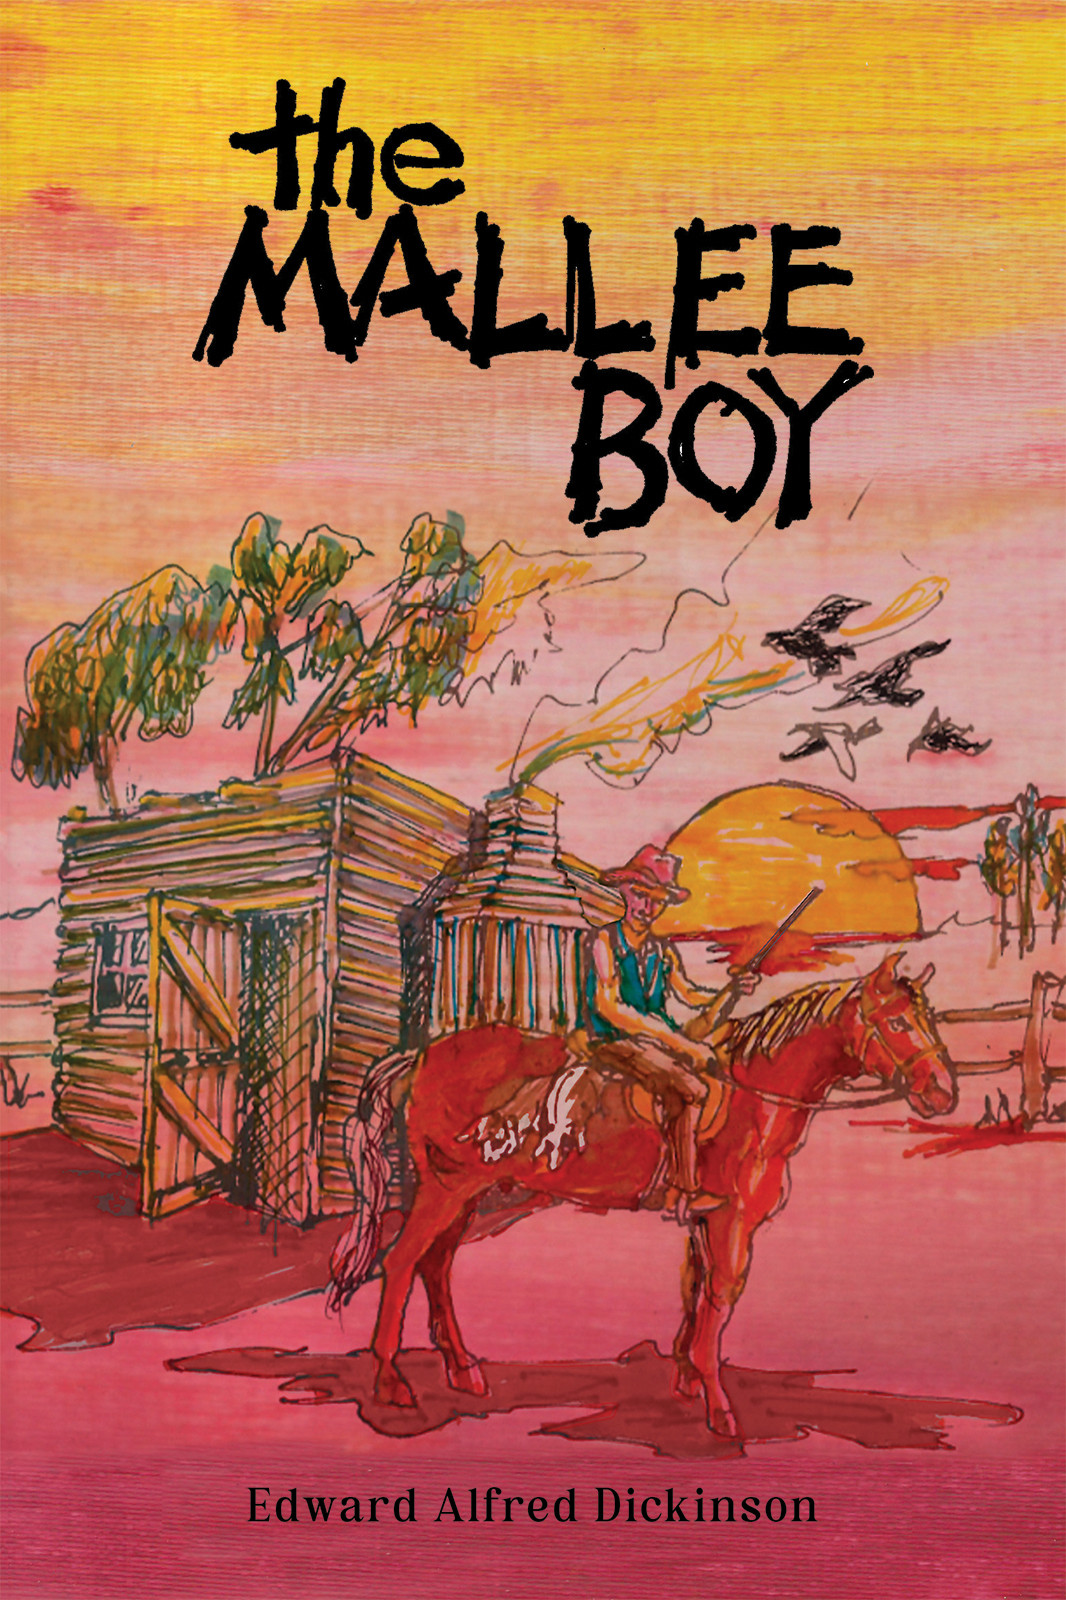 The Mallee Boy